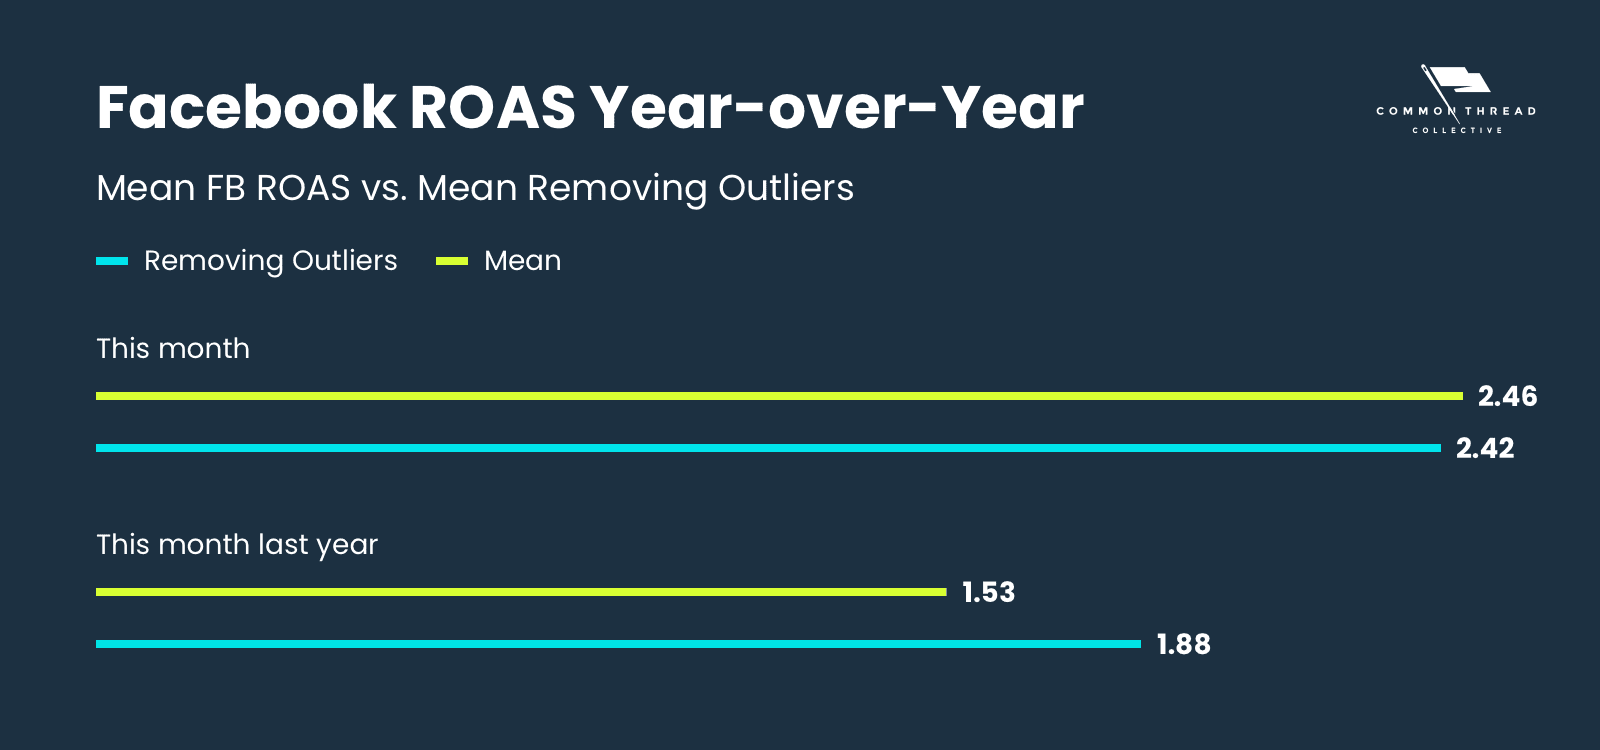 Facebook ROAS year-over-year mean comparison, including and removing outliers